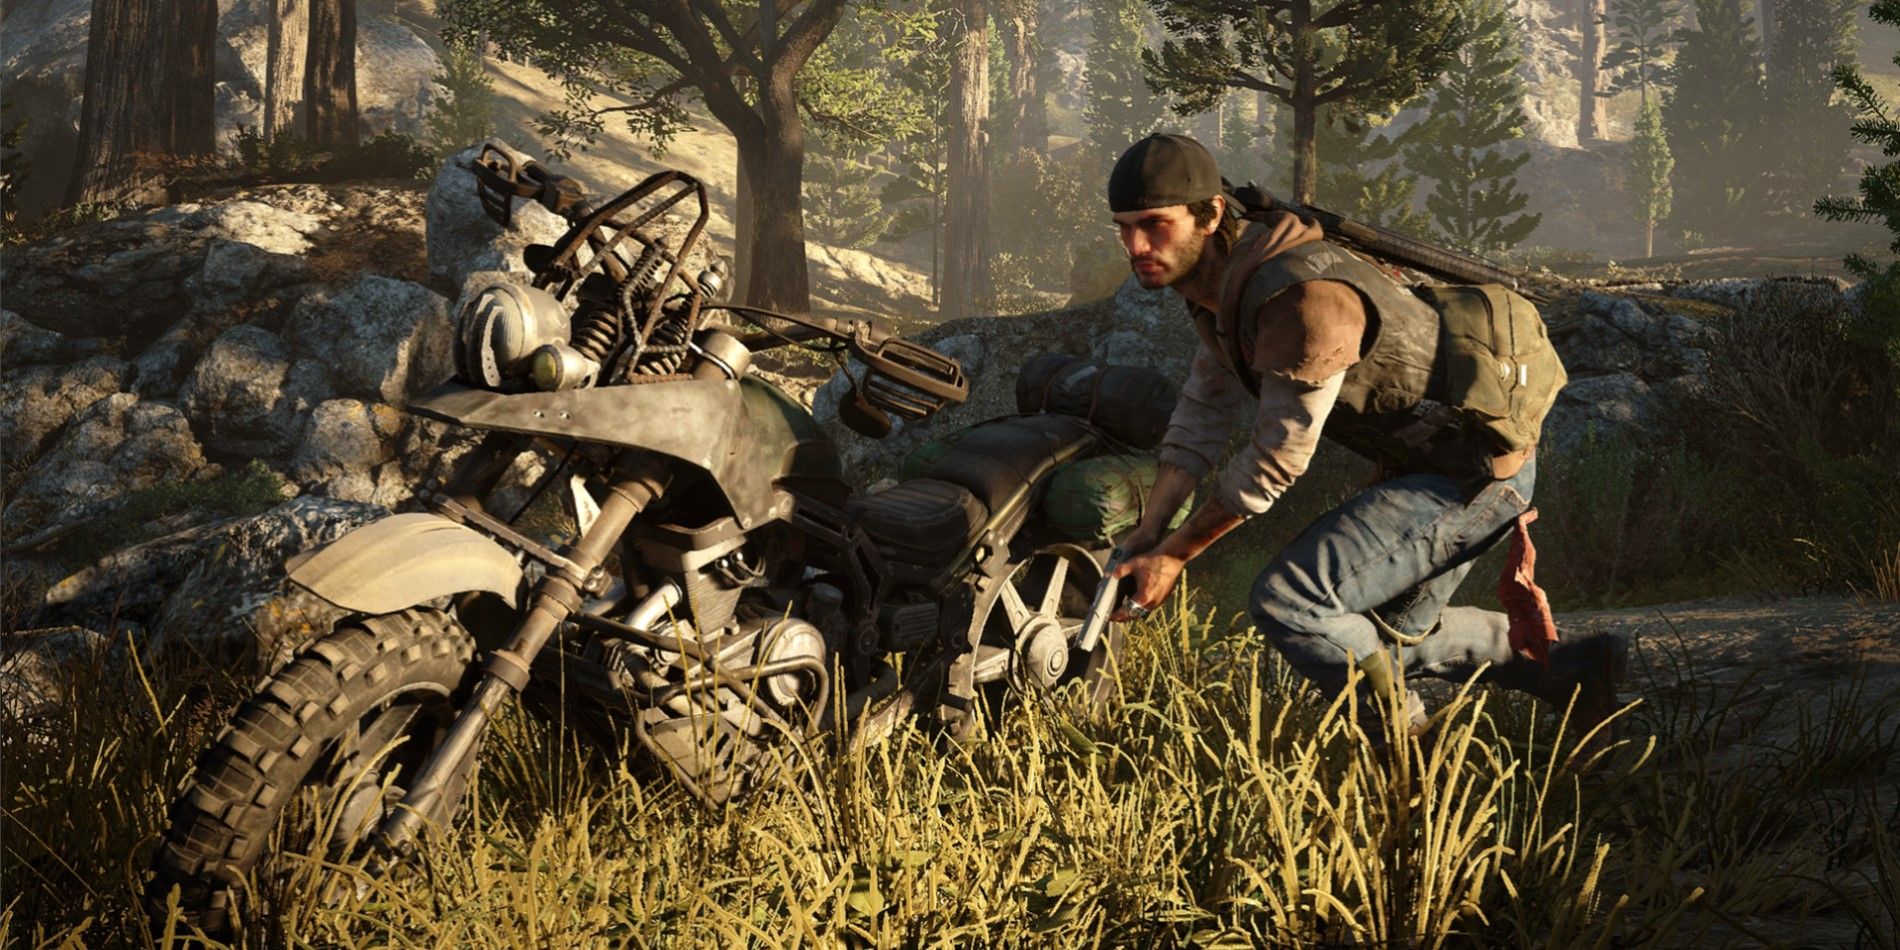 An image of Deacon holding a gun next to his bike in Days Gone.